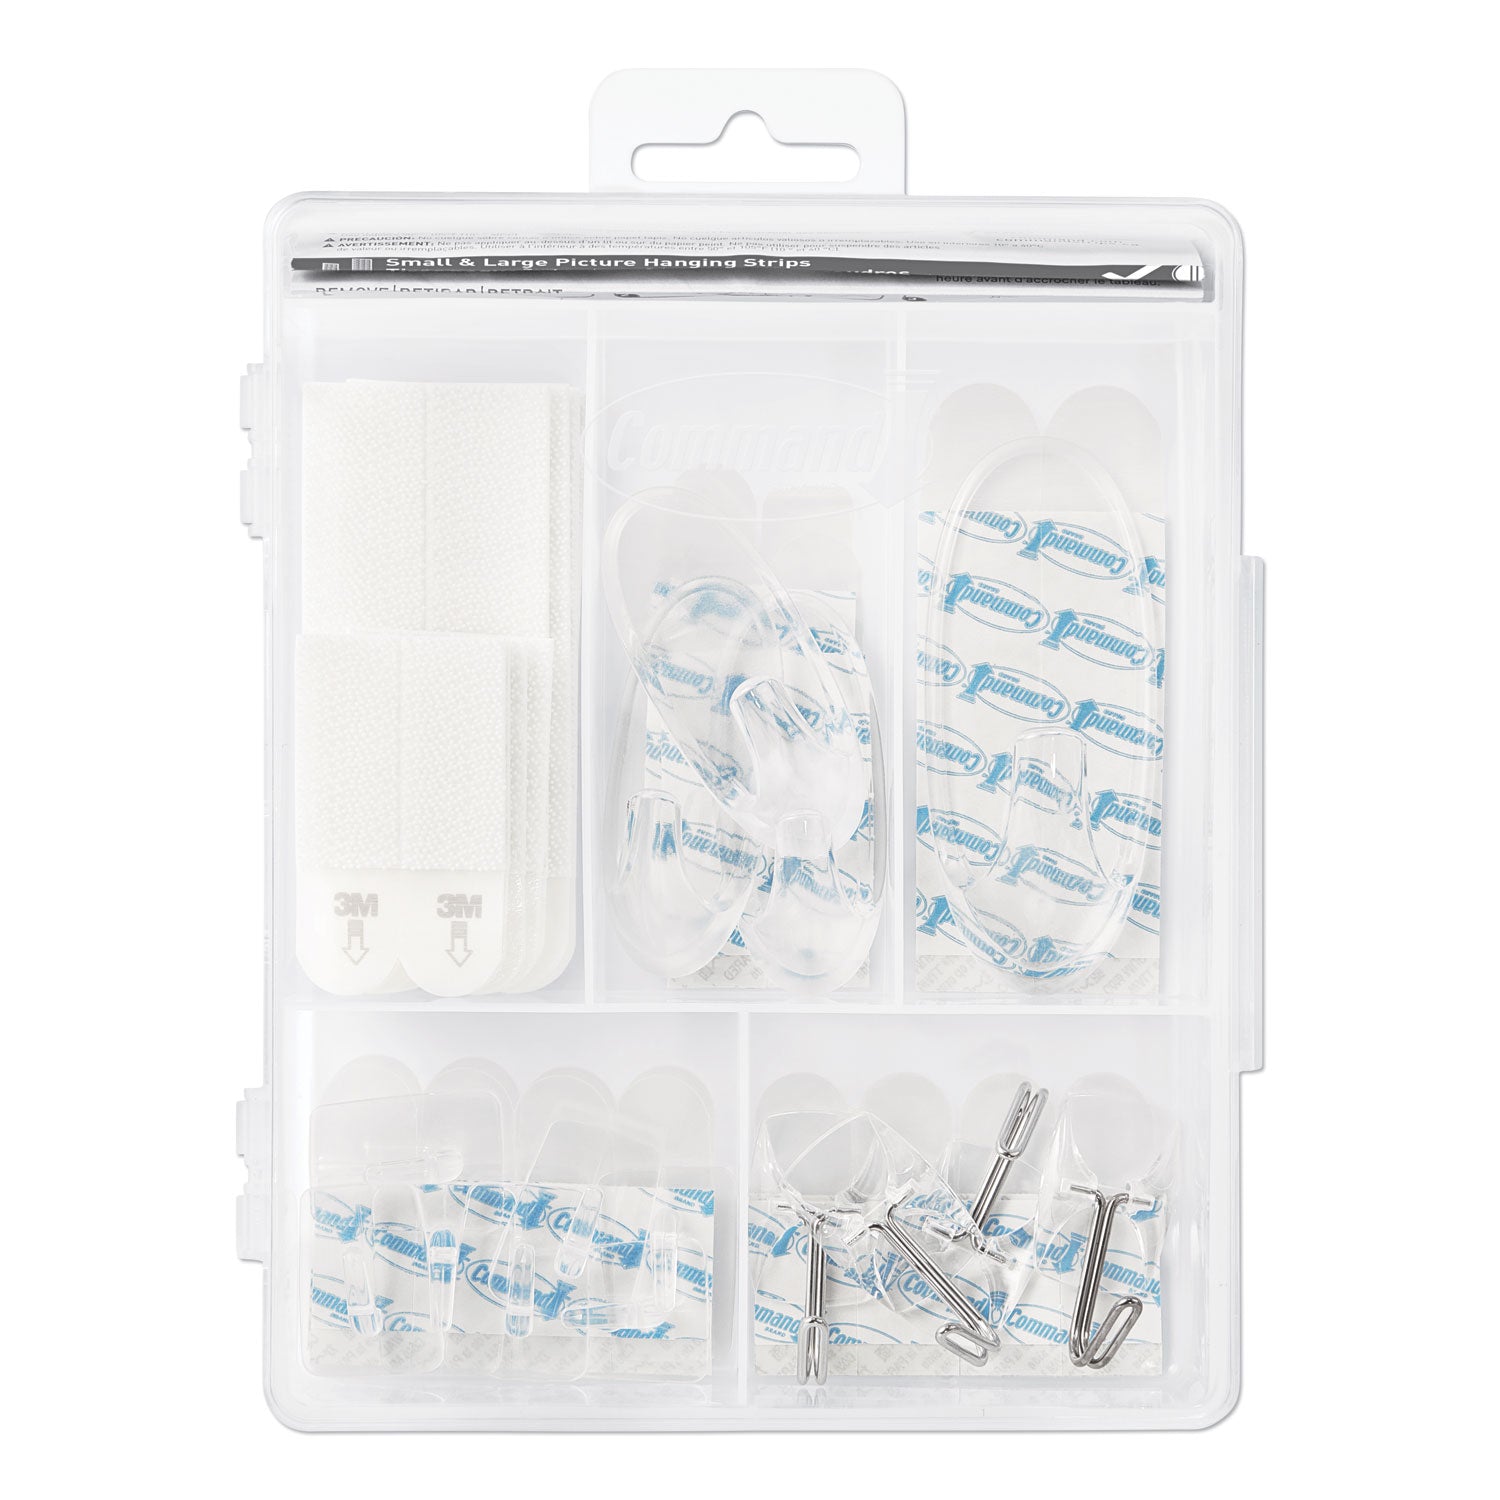 clear-hooks-and-strips-assorted-sizes-plastic-005-lb;-2-lb;-4-16-lb-capacities-16-picture-strips-15-hooks-22-strips-pack_mmm17232es - 3